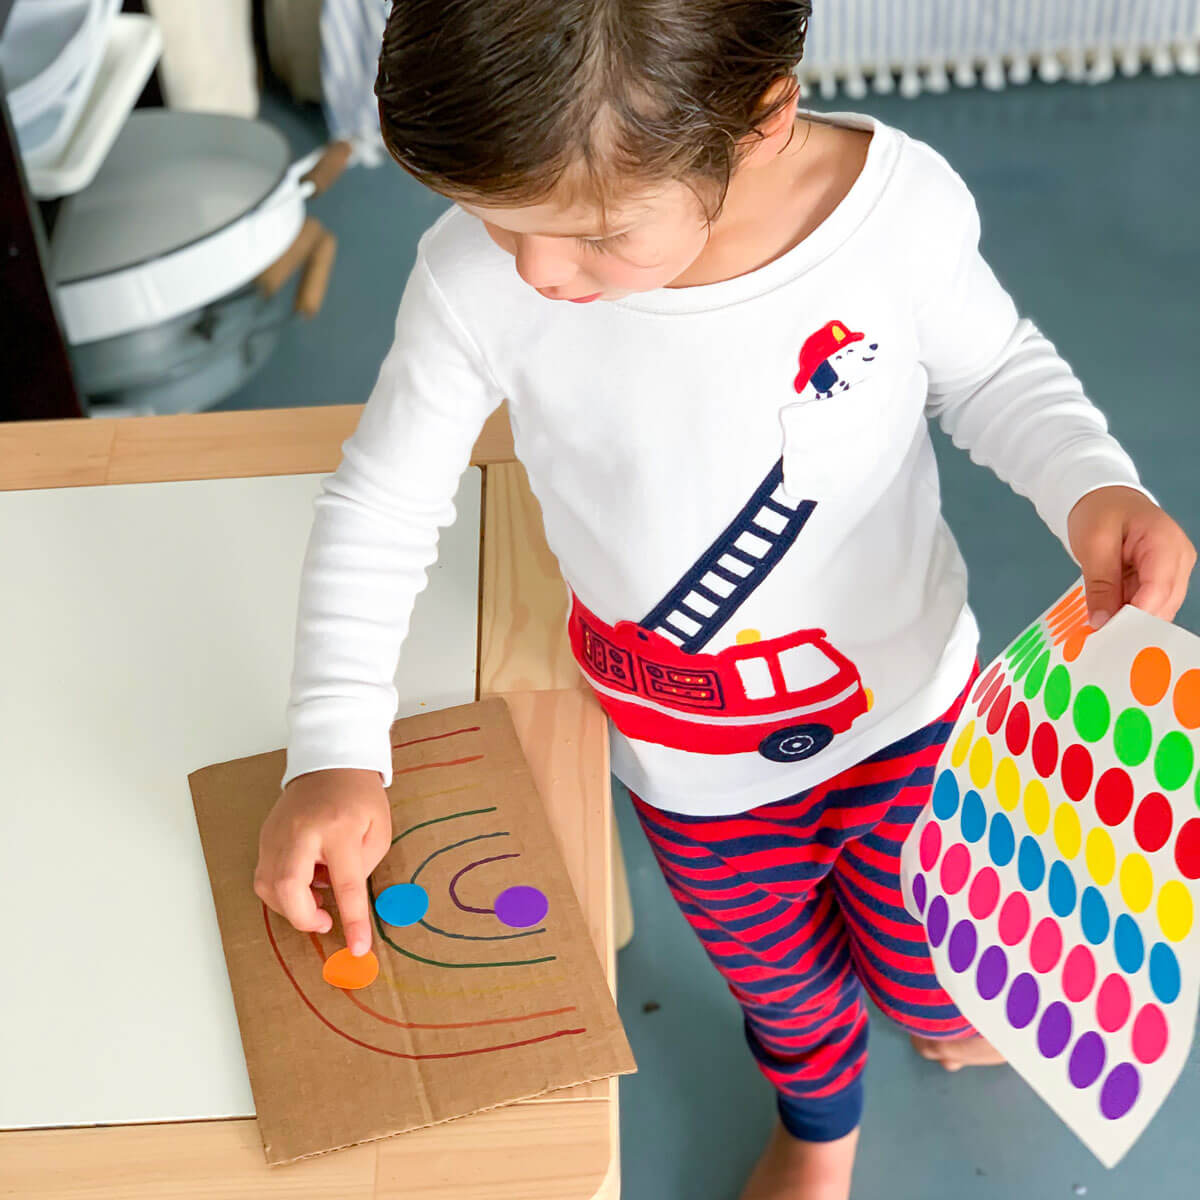 rainbow activity using dot stickers also have free printable dot the rainbow activity